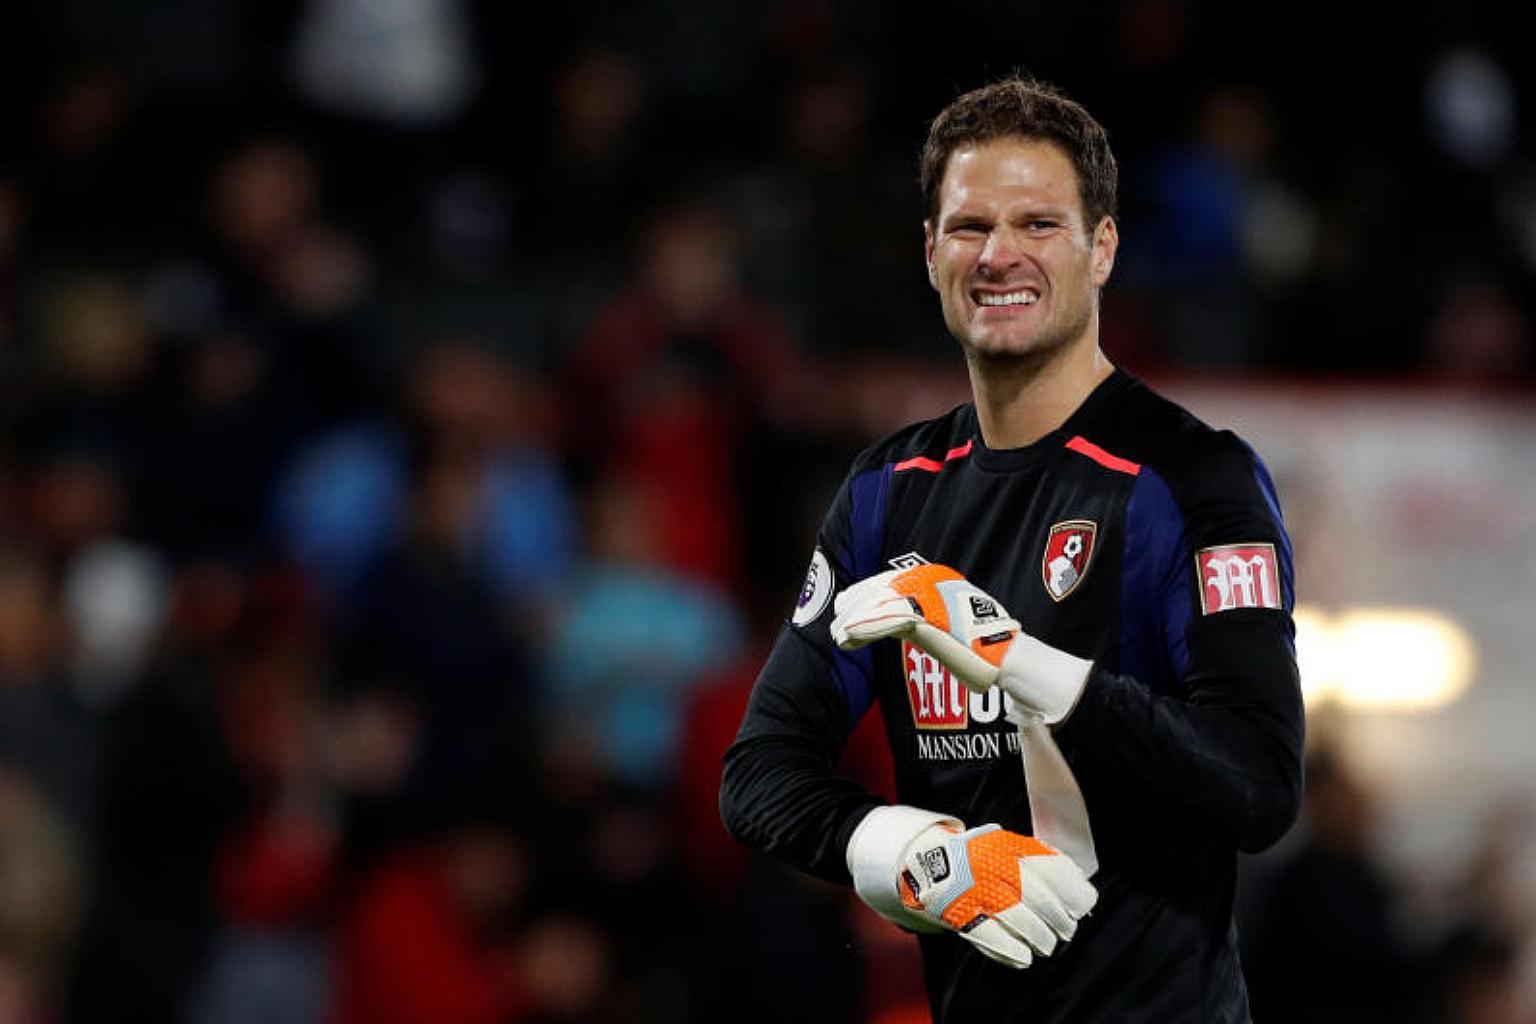 Bournemouth goalkeeper Asmir Begovic in action. (Getty Images)